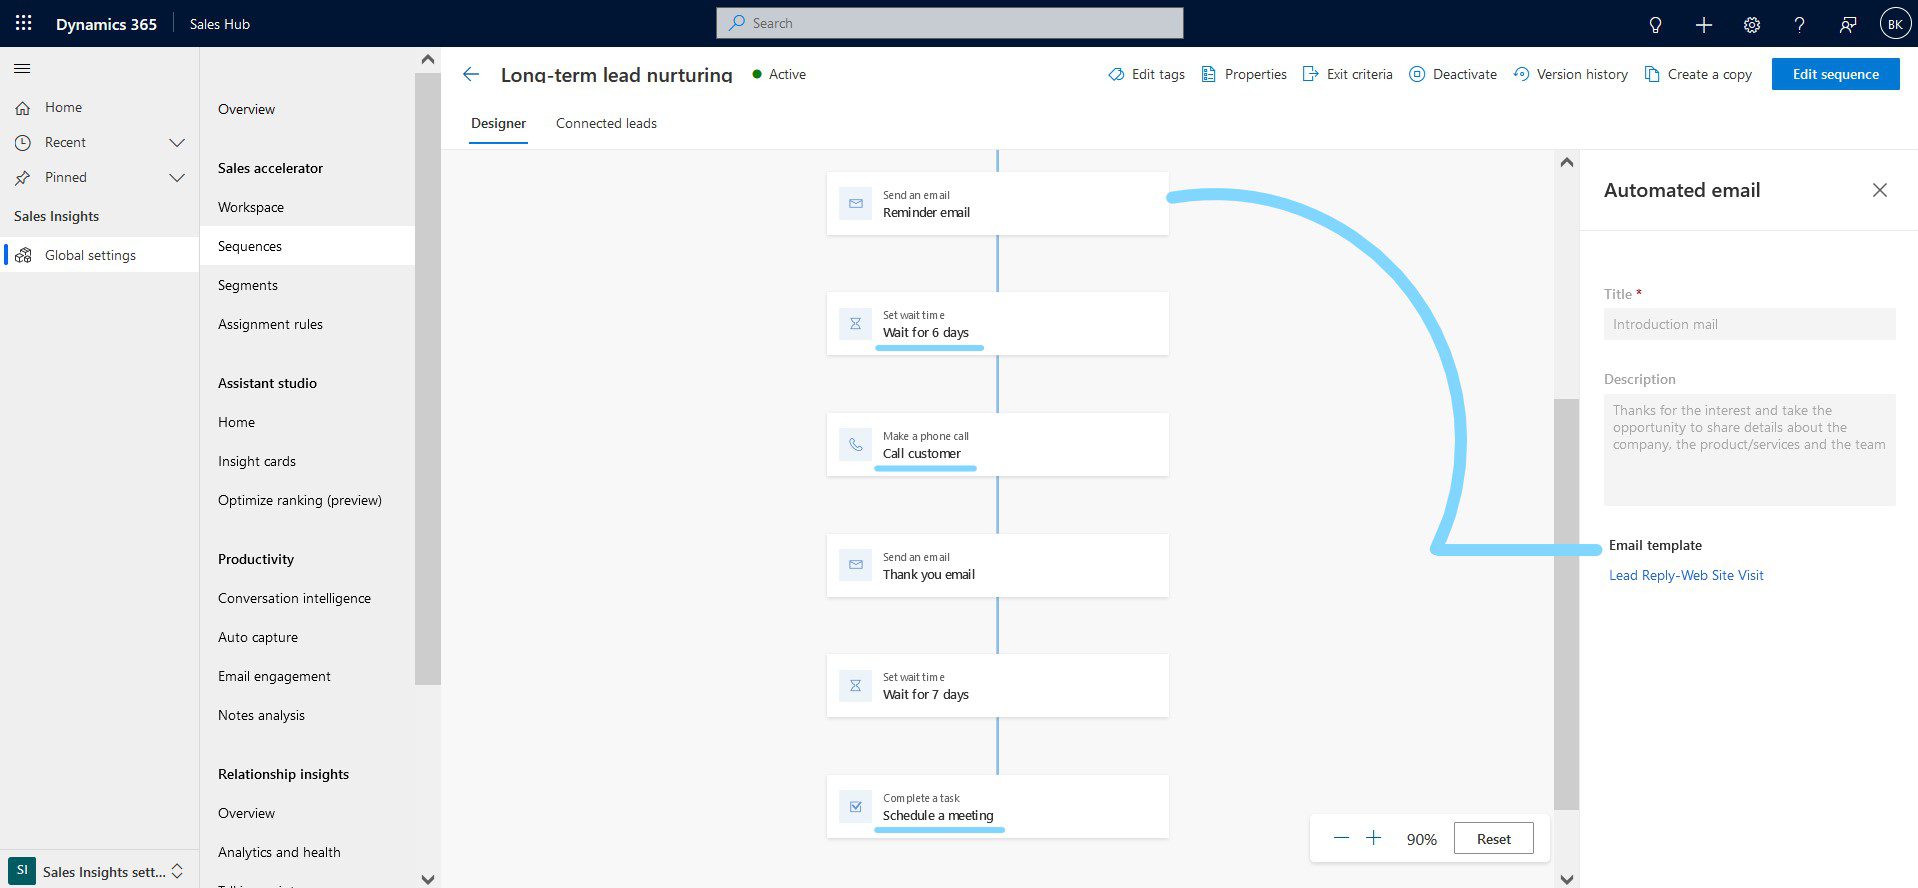 The image contains a flowchart for one of the standard sales sequences that can be customized for specific sales processes or industries inside the Dynamics 365 for Sales interface. Six different tasks, including reminder emails and phone calls to the sales prospect are displayed vertically. 